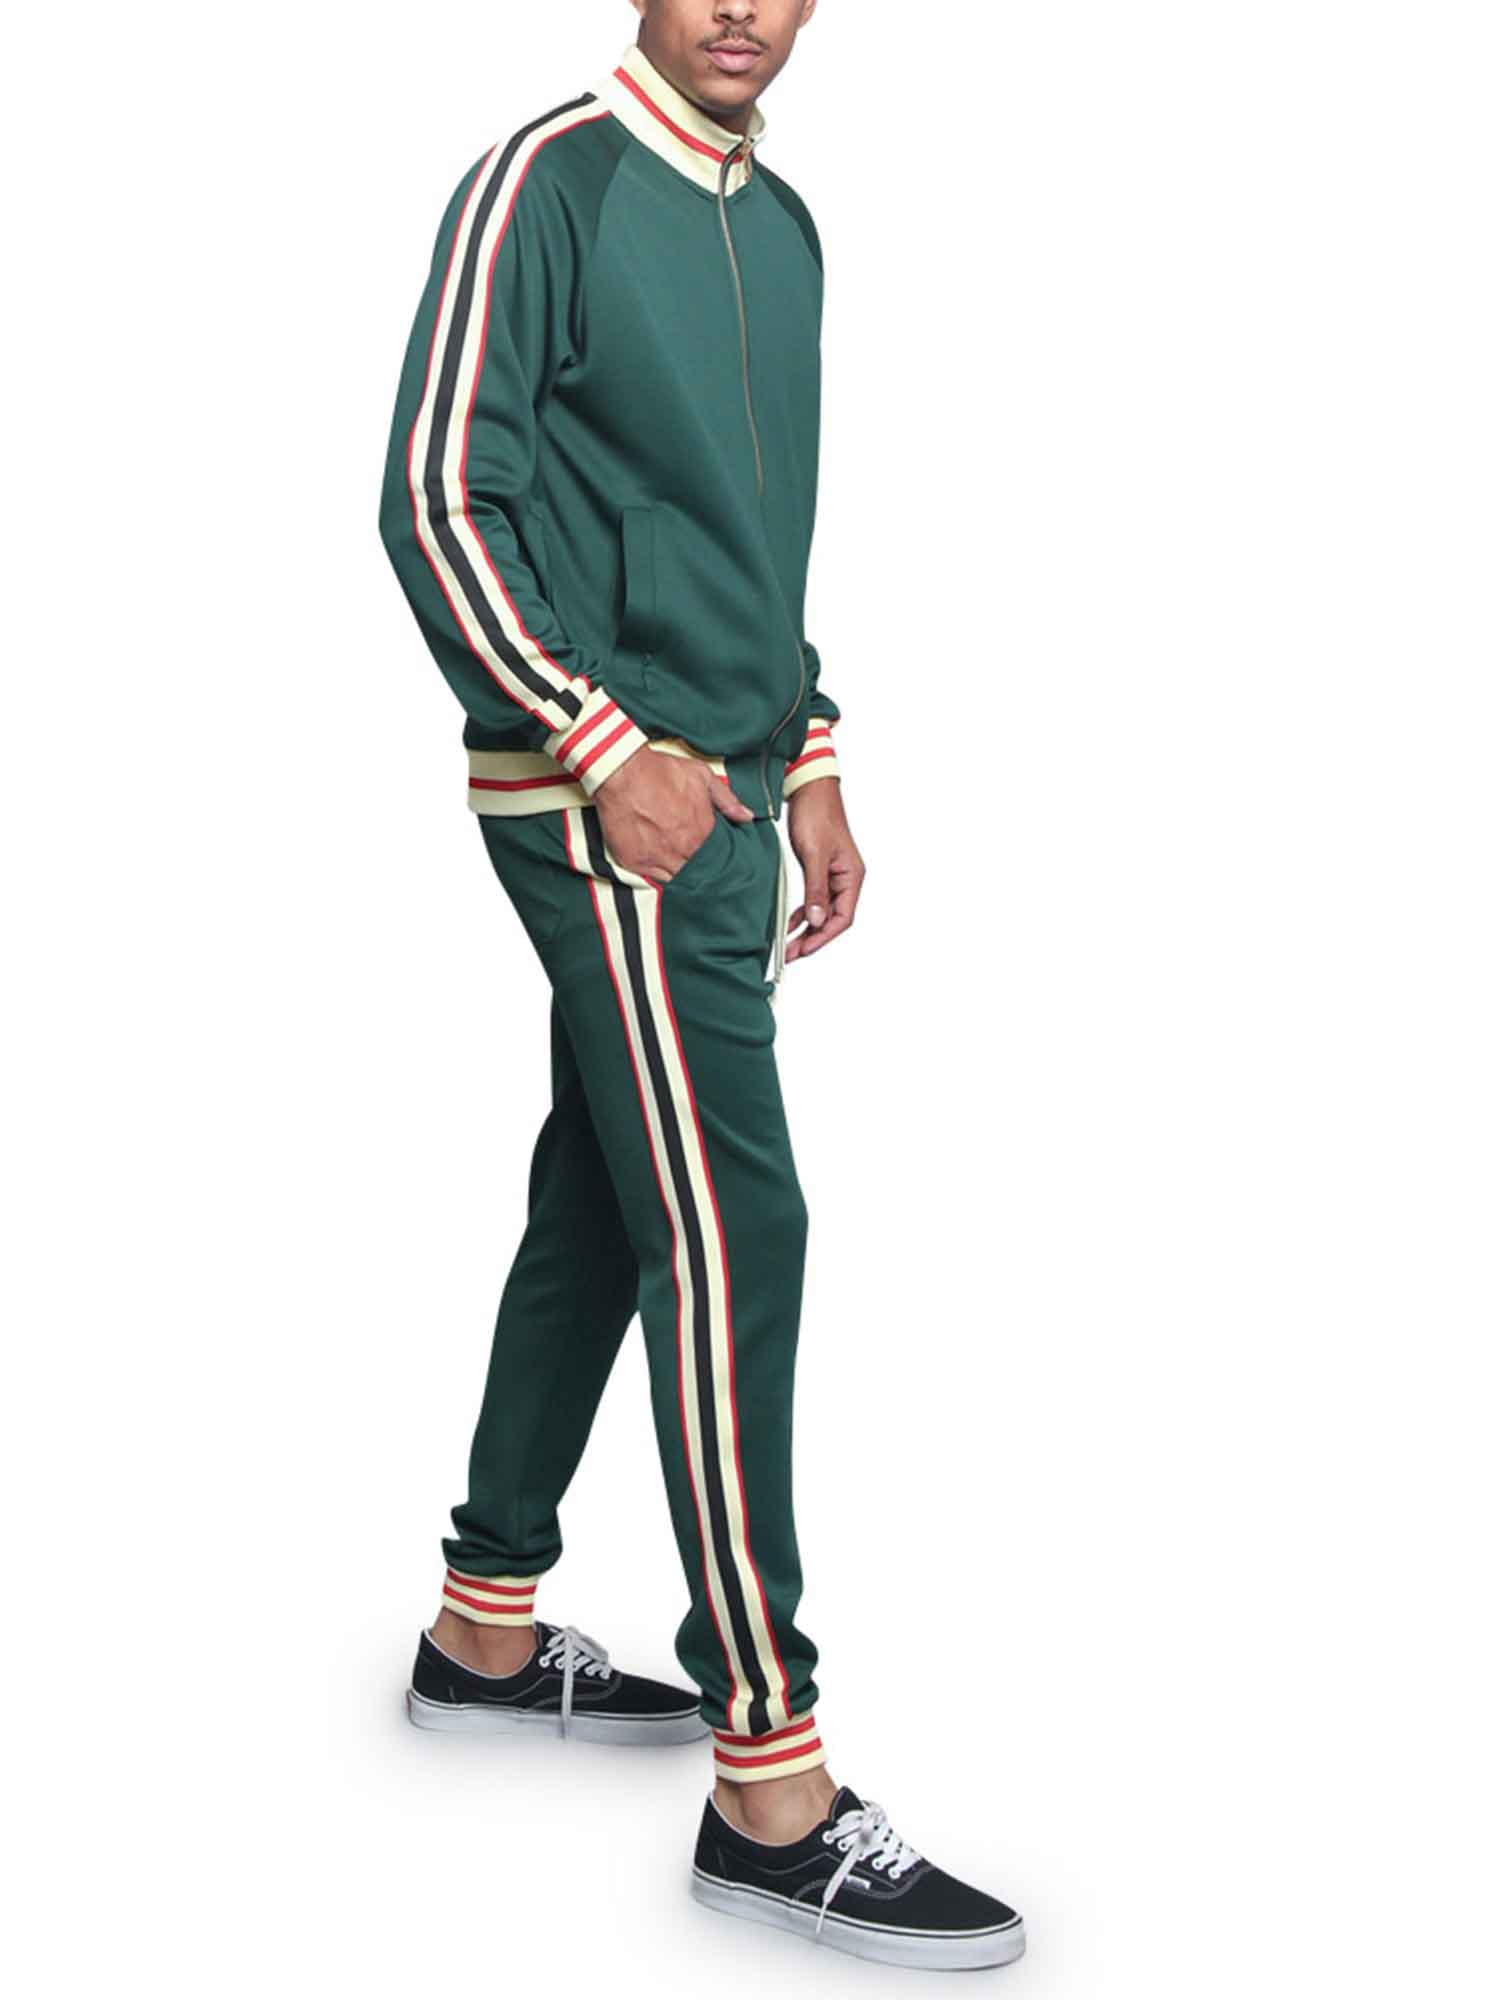 Howme Mens Striped 2-Piece Active Football Breathable Sweatsuit Set